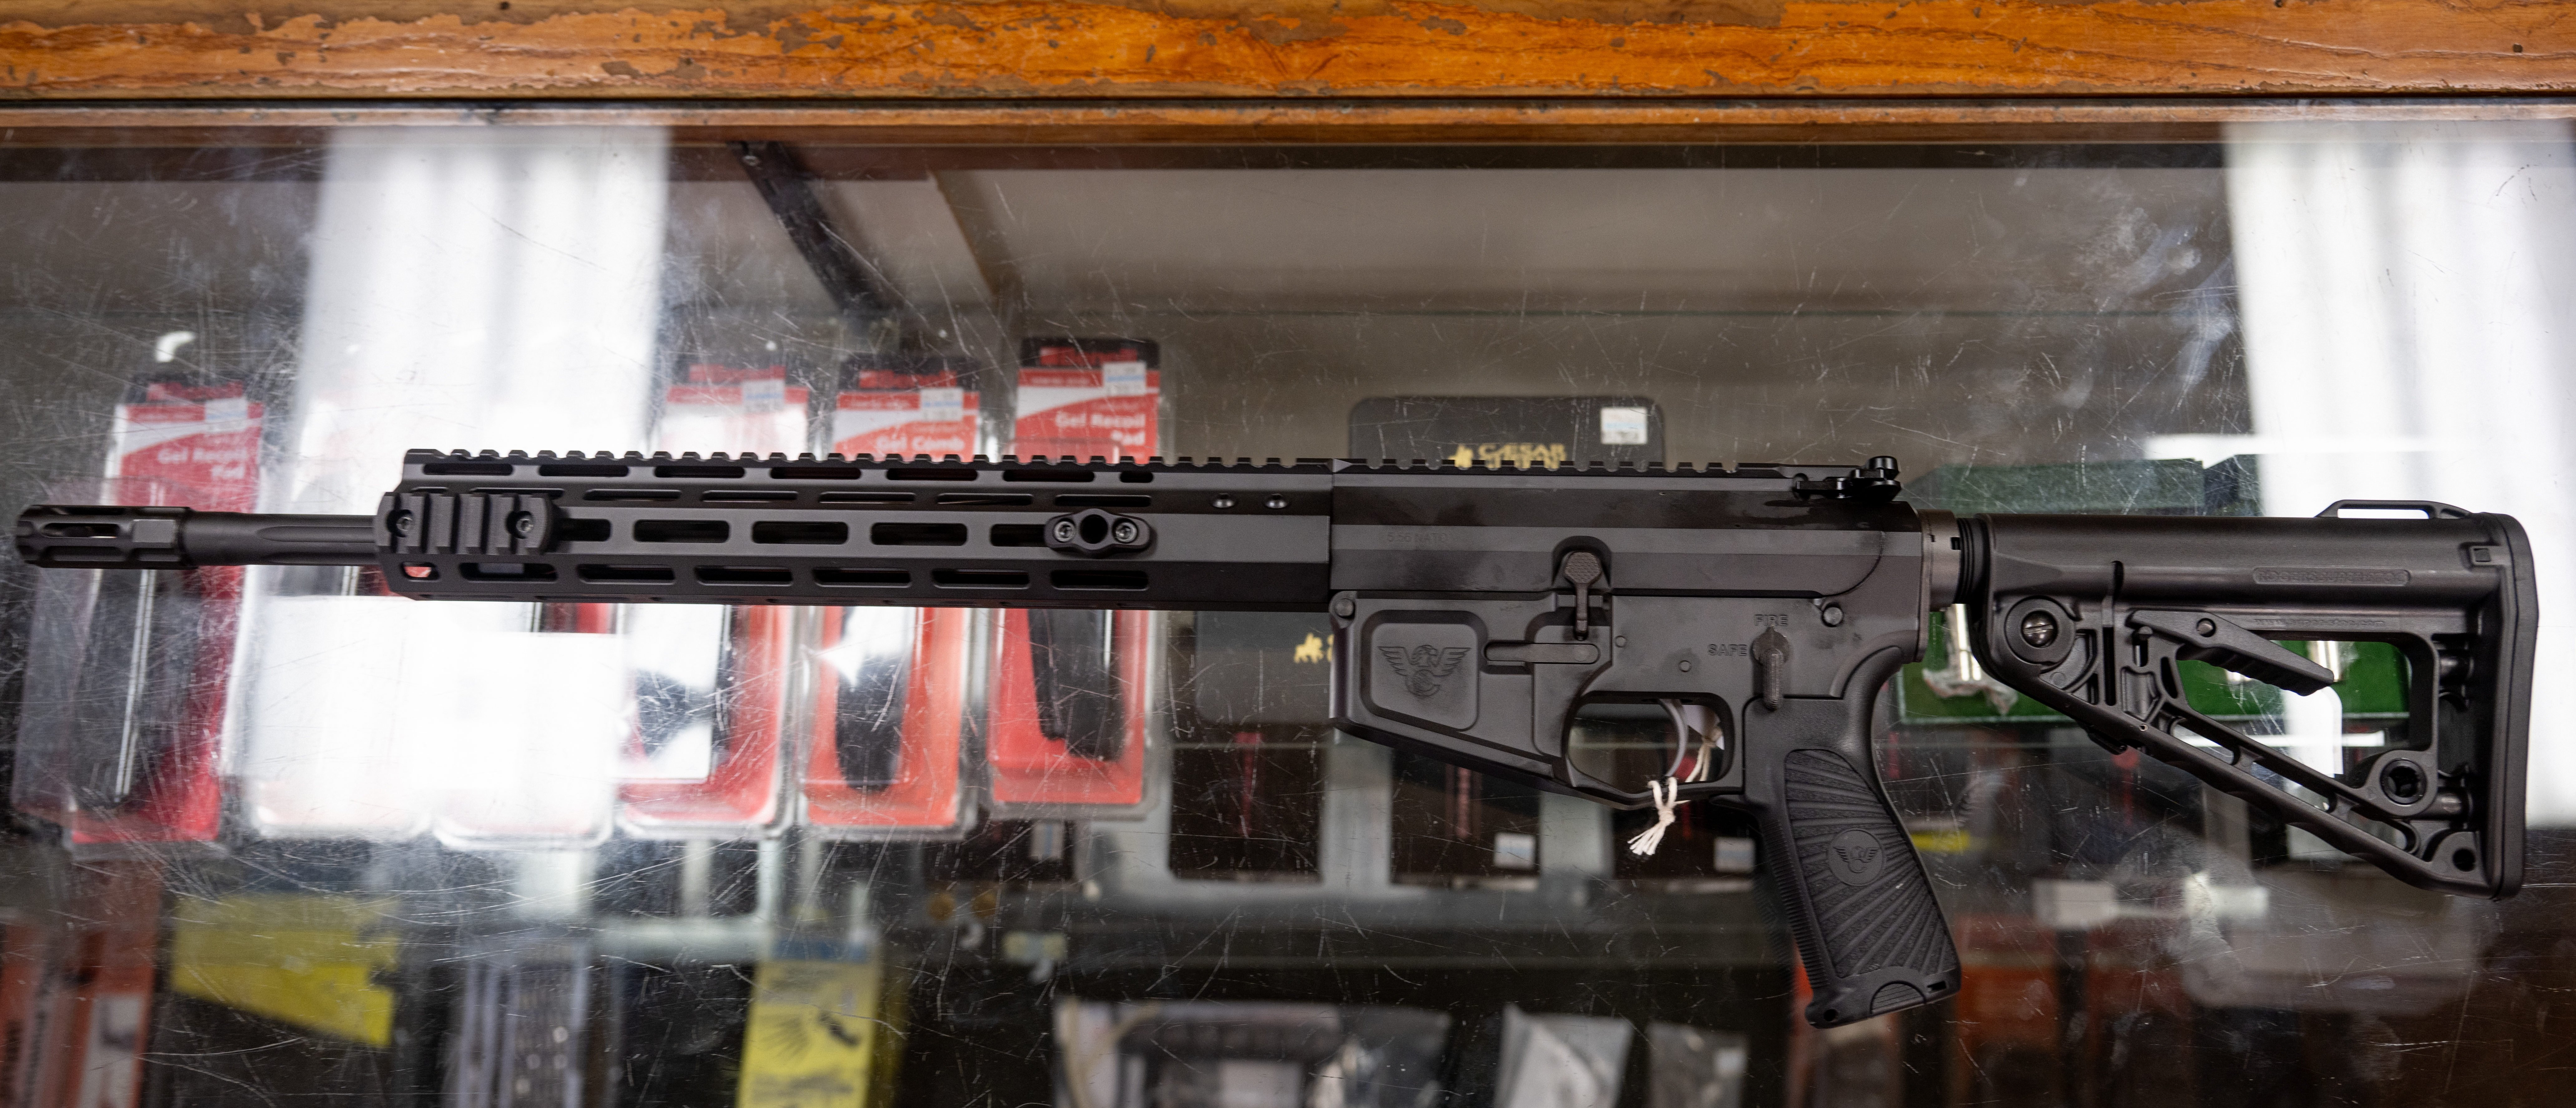 AUSTIN, TEXAS - AUGUST 25: In this photo illustration, a semi-automatic AR-15 is displayed on a countertop at the McBride Guns Inc. store on August 25, 2023 in Austin, Texas. The Biden administration plans to revoke licenses from hundreds of firearms dealers, provoking disagreements among gun-store owners and law-enforcement veterans around the country. (Photo Illustration by Brandon Bell/Getty Images)